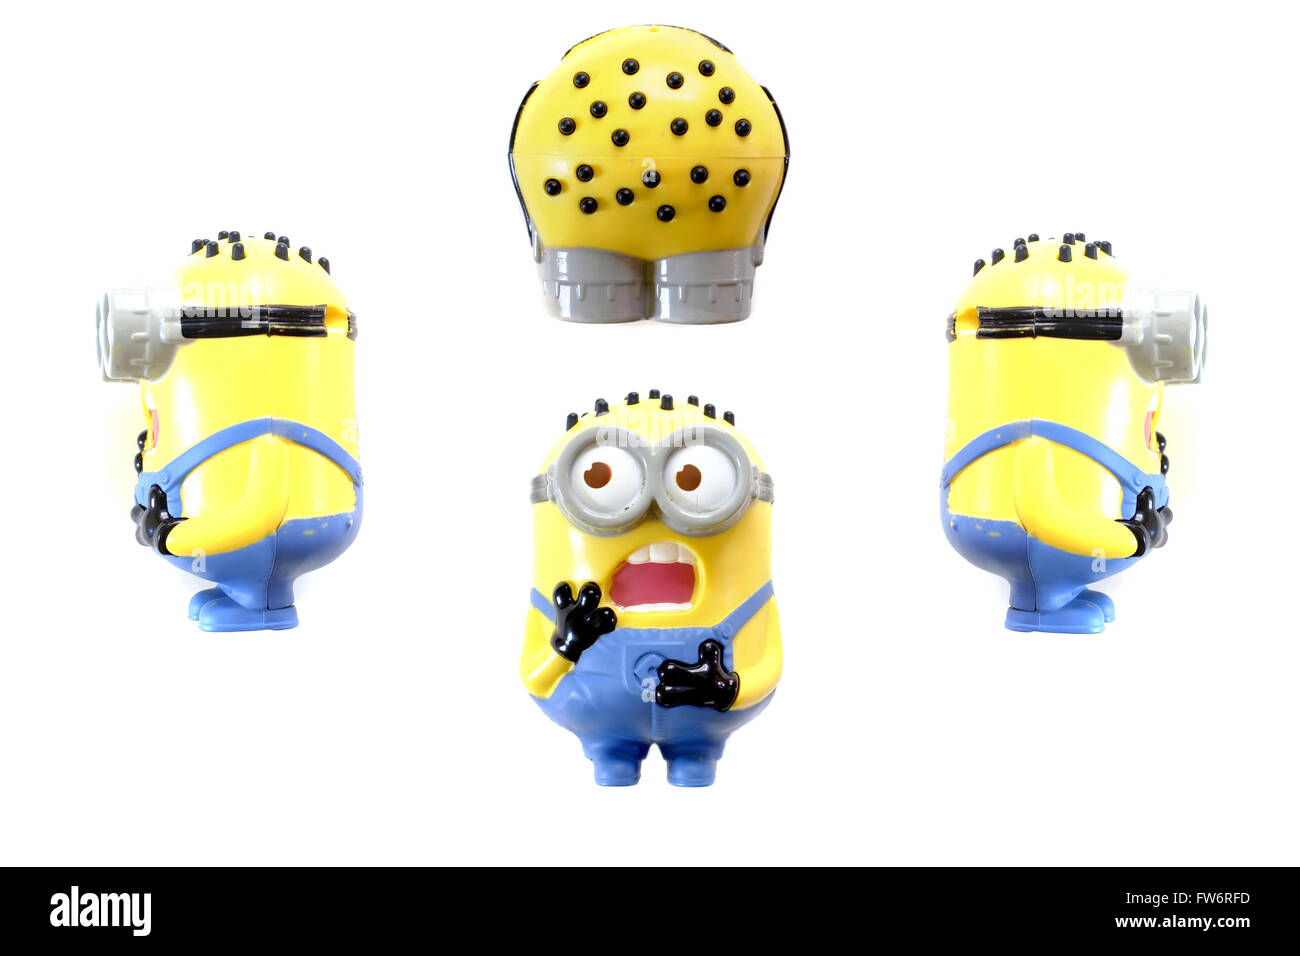 Different views of a Minion toy figure from the Despicable Me film photographed against a white background. Stock Photo